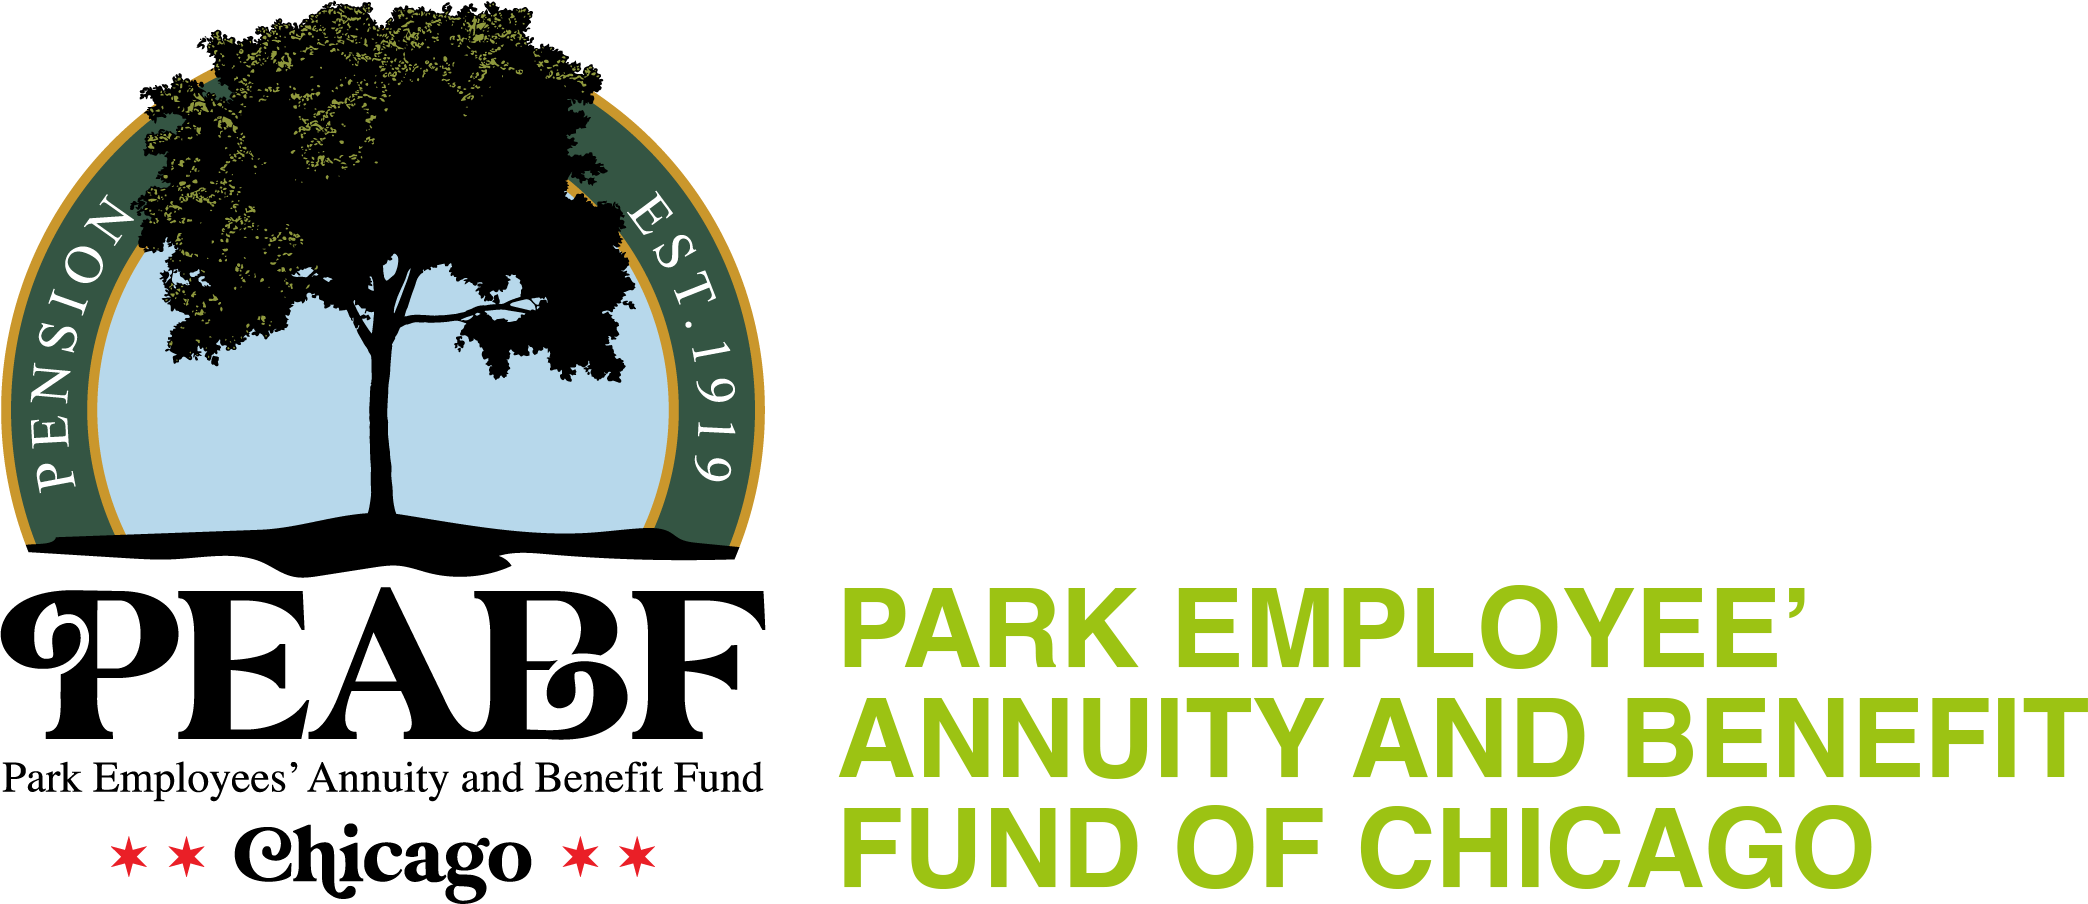 Park Employees' Annuity and Benefits Fund of Chicago